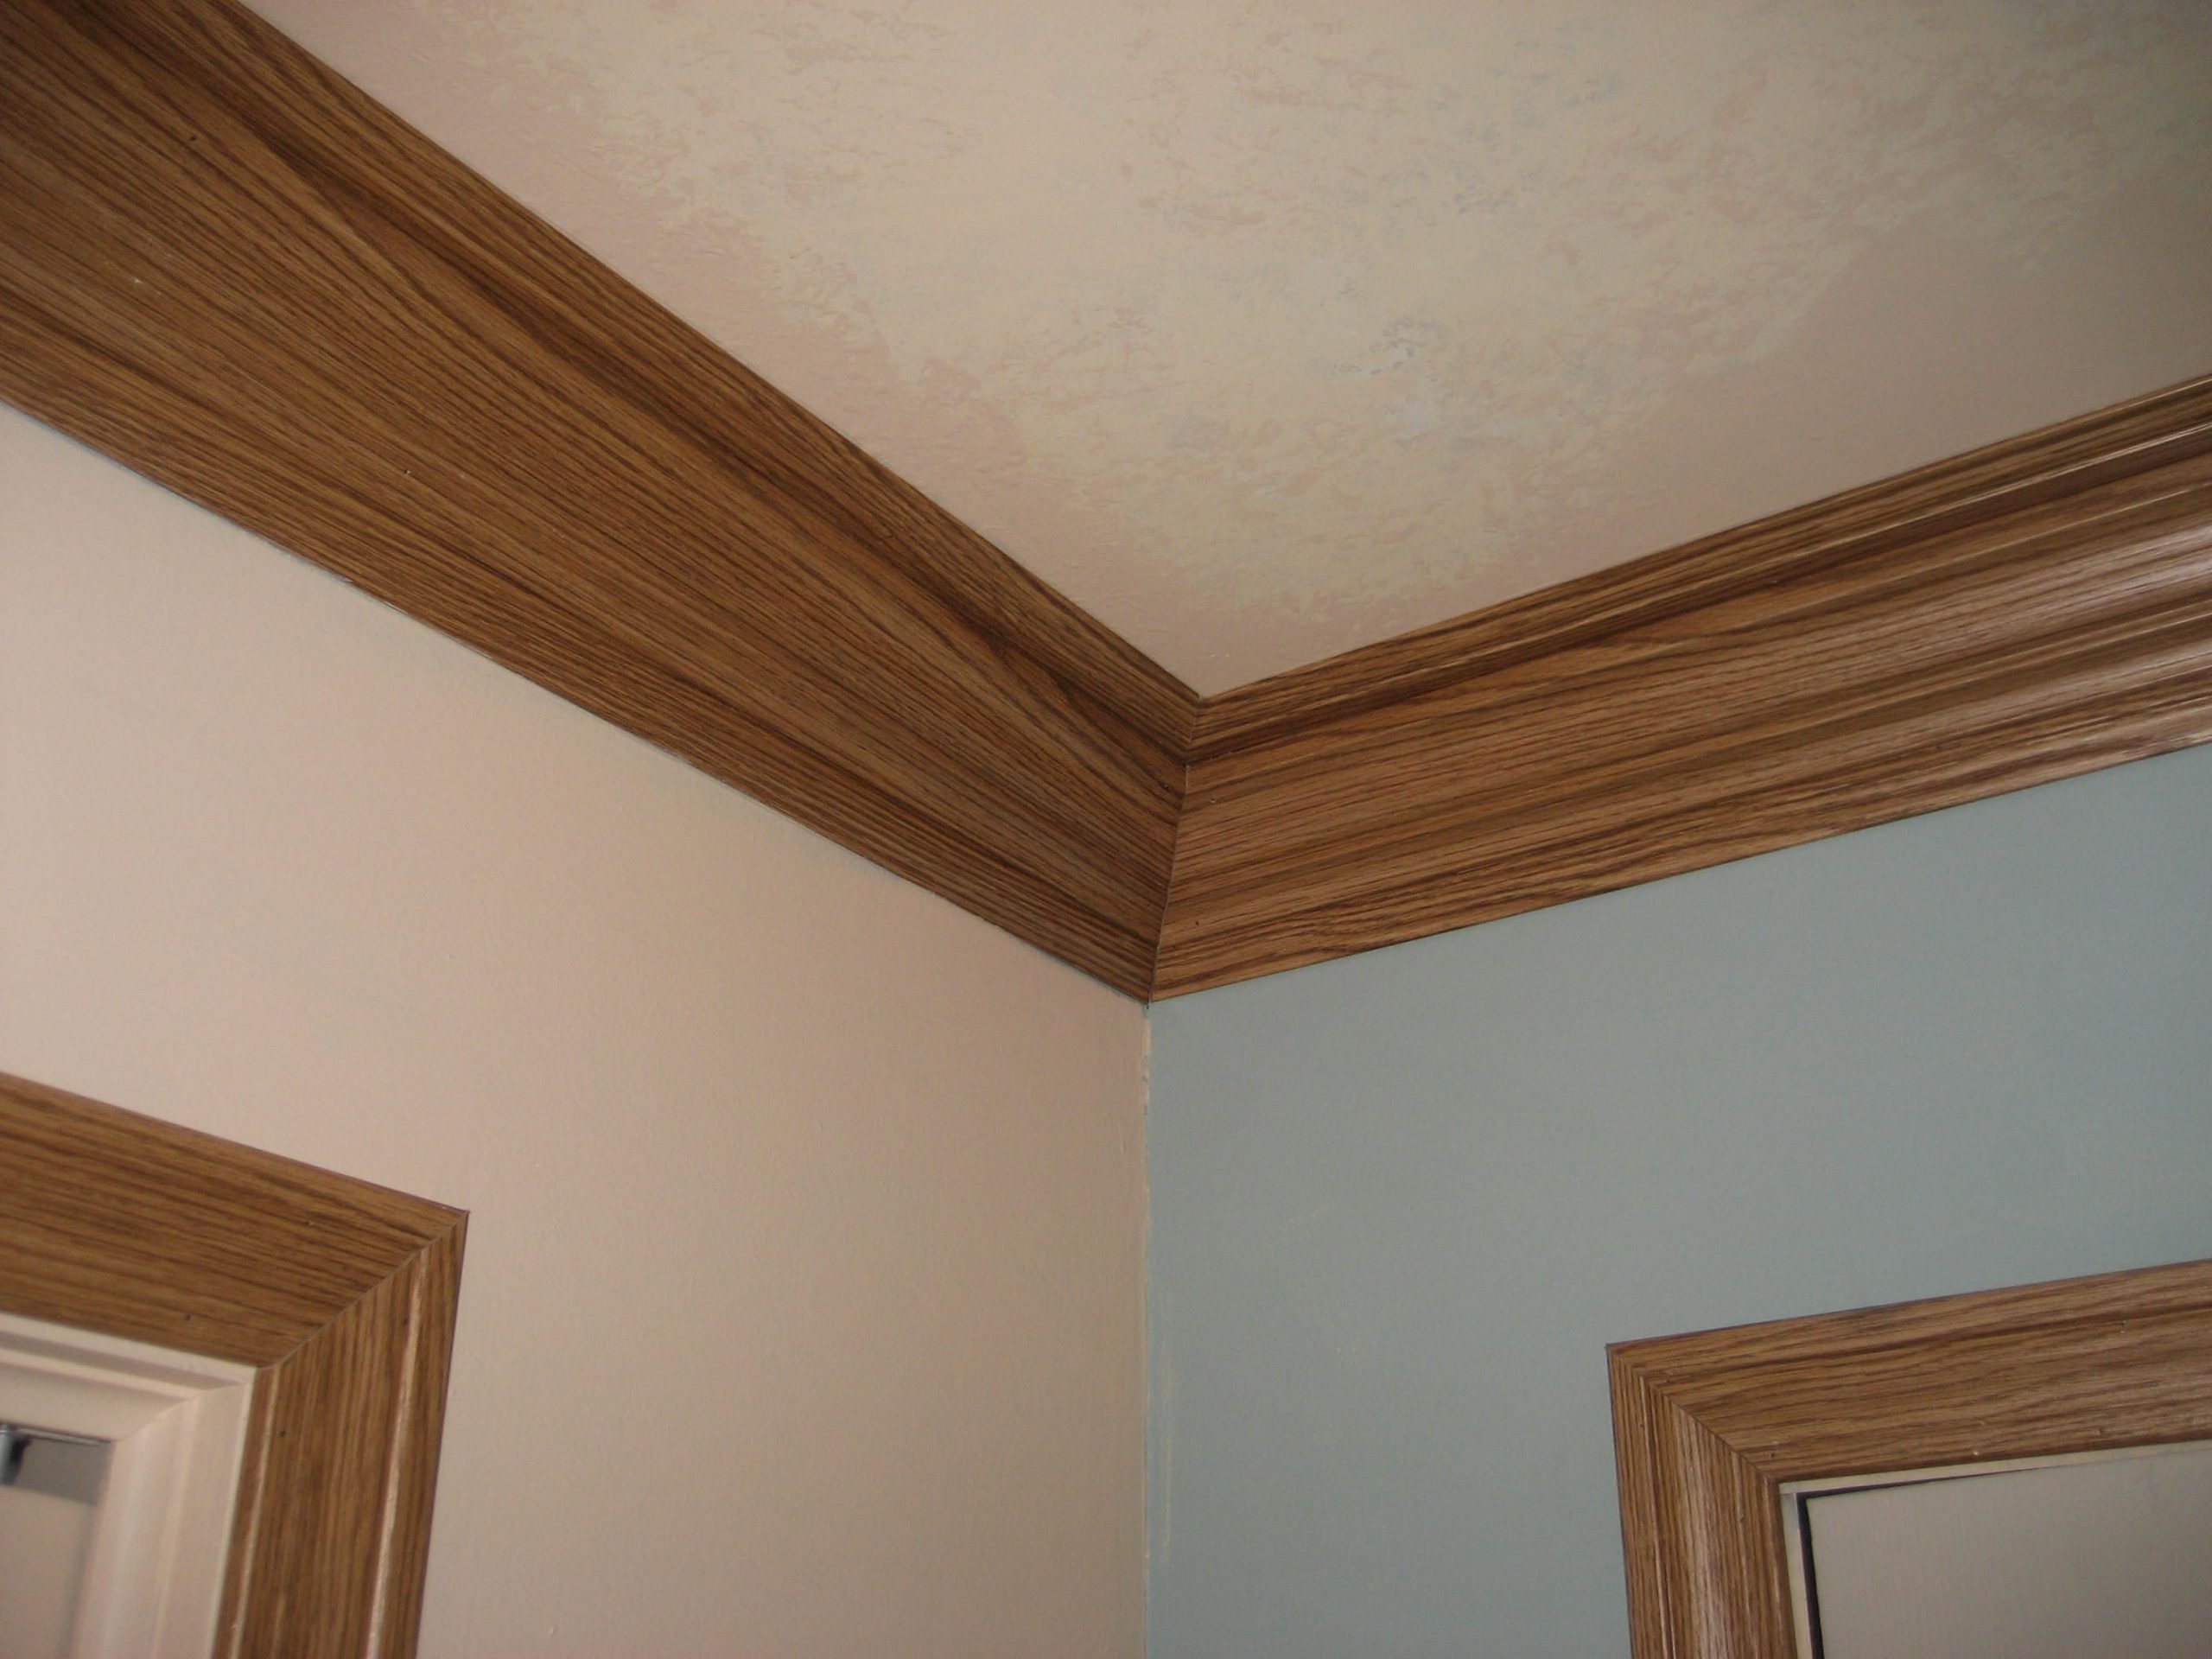 Crown Molding done by my husband. Very cost saving.